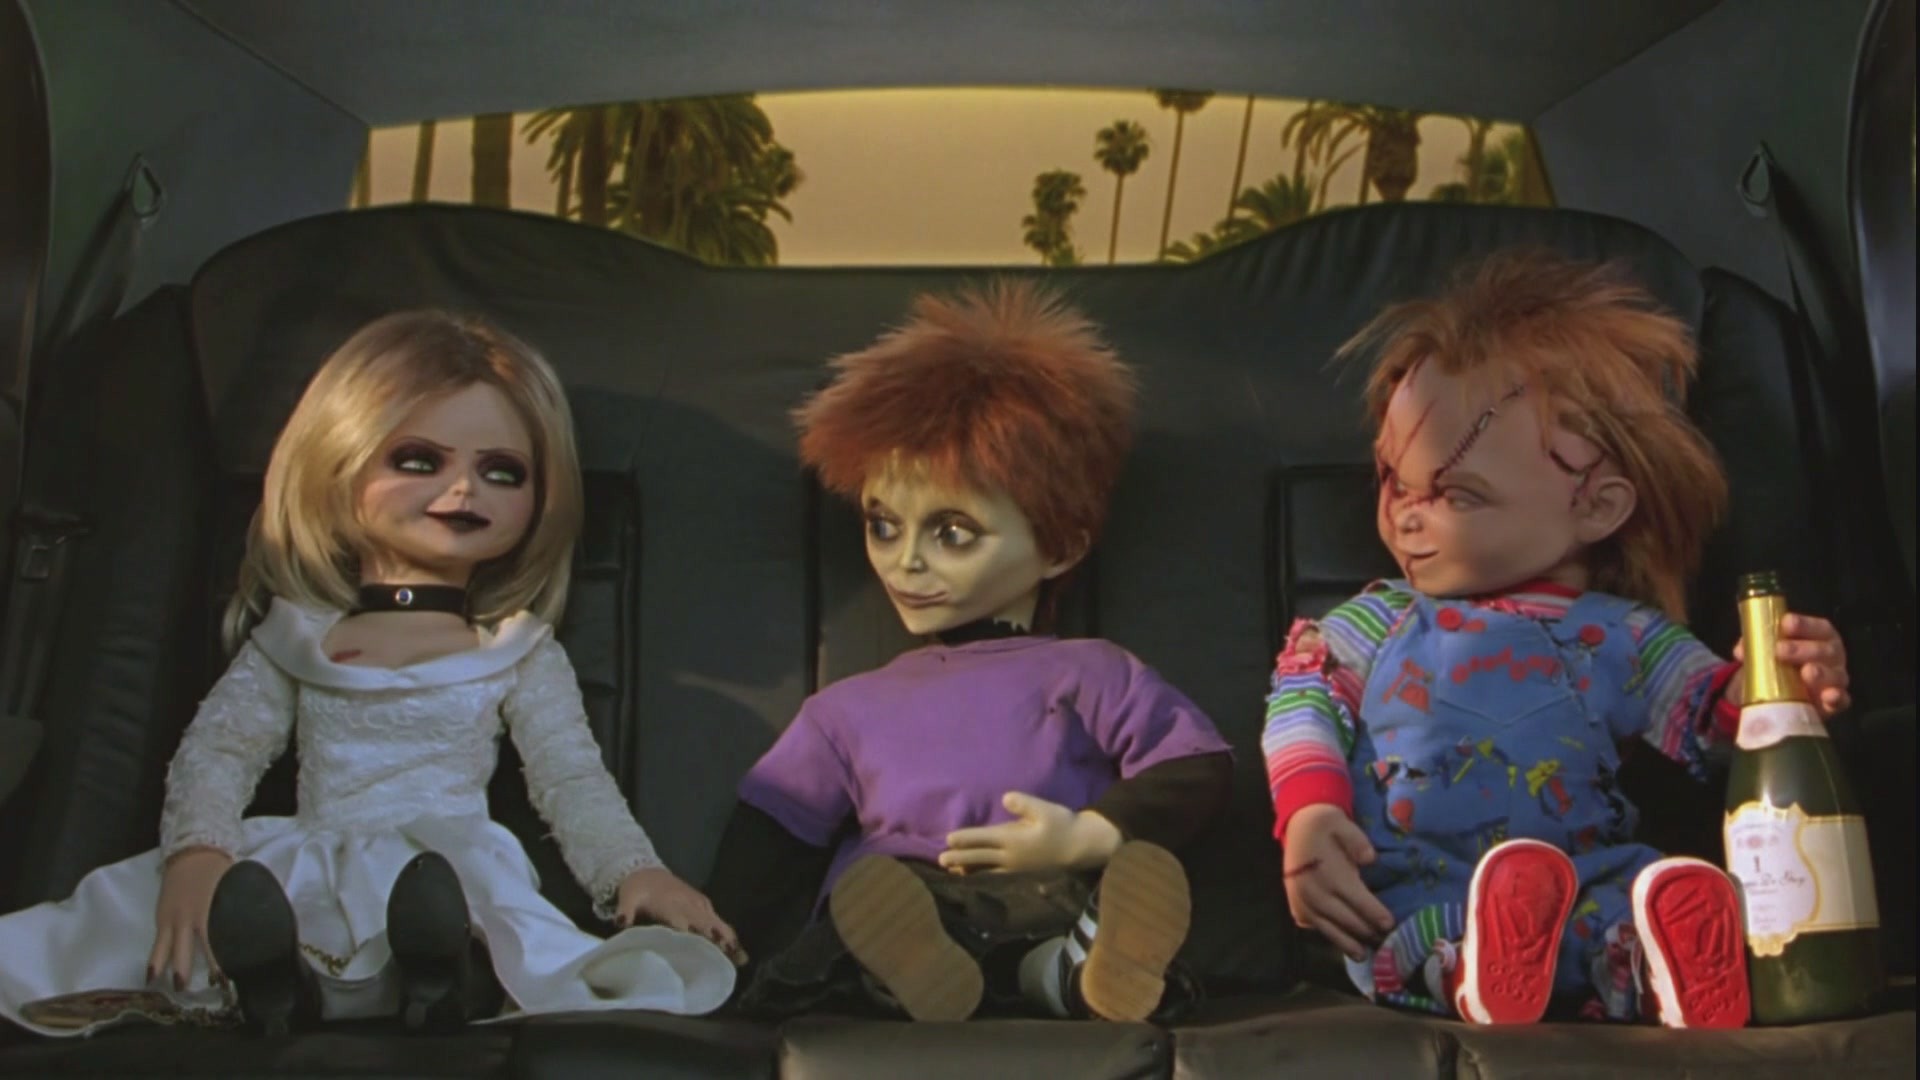 Chucky Doll Wallpapers